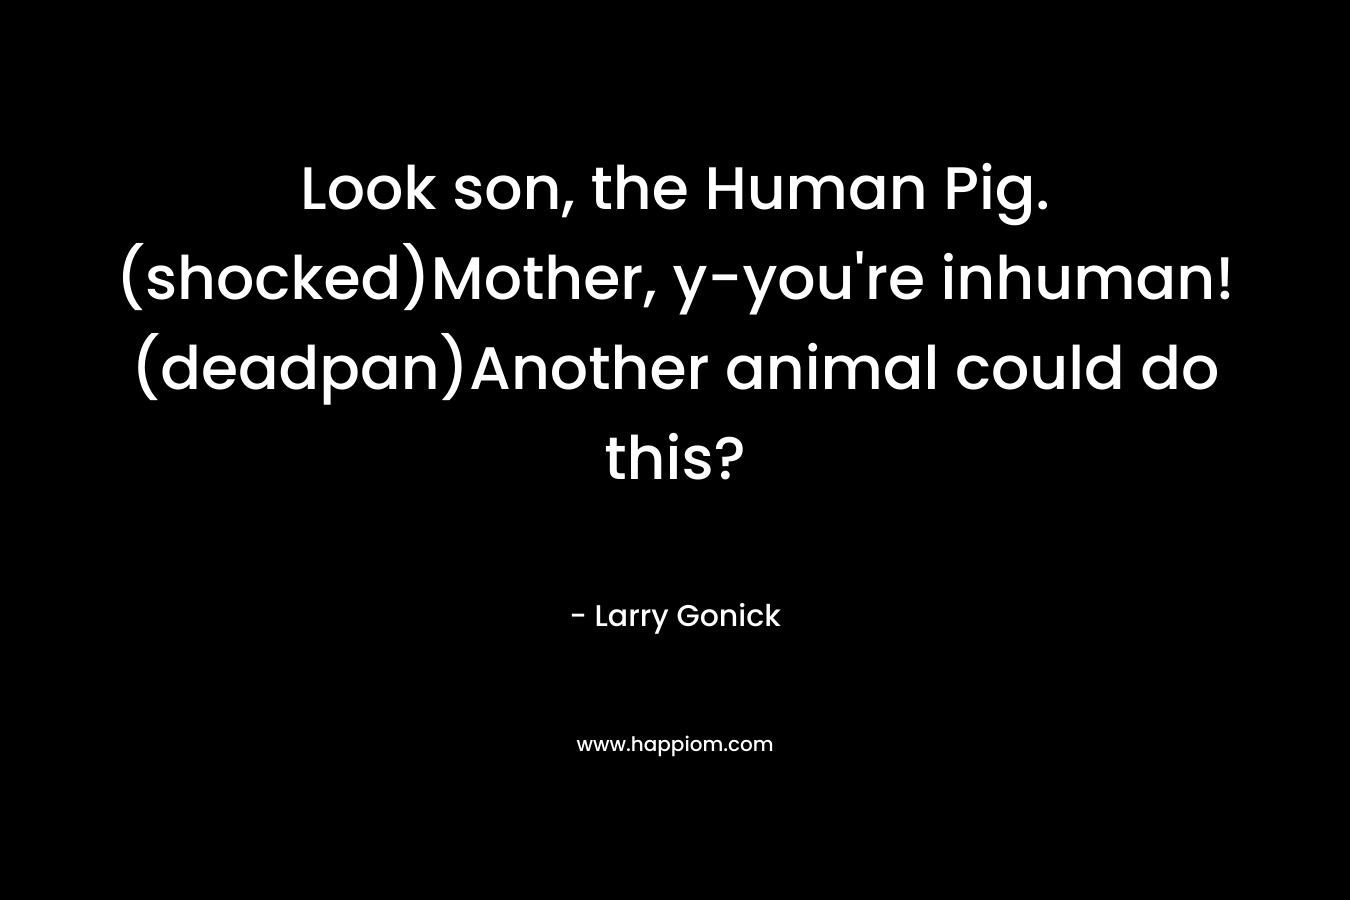 Look son, the Human Pig.(shocked)Mother, y-you're inhuman!(deadpan)Another animal could do this?